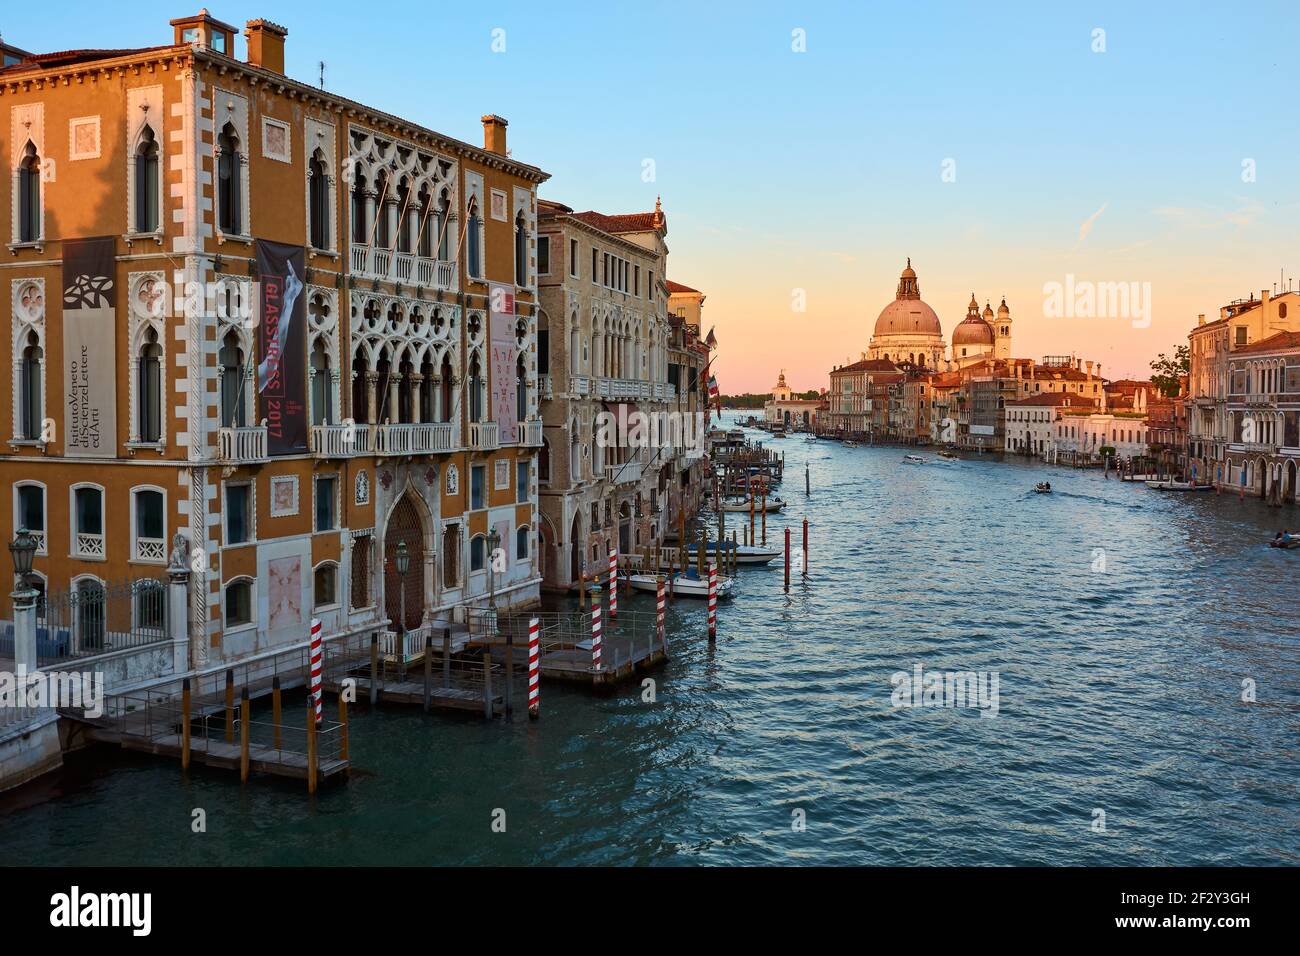 MAY 21, 2017 - VENICE, ITALY: View of the Grand Canal and Santa Maria della Salute, famous Roman Catholic cathedral, seen from Ponte Dell'Accademia. Stock Photo